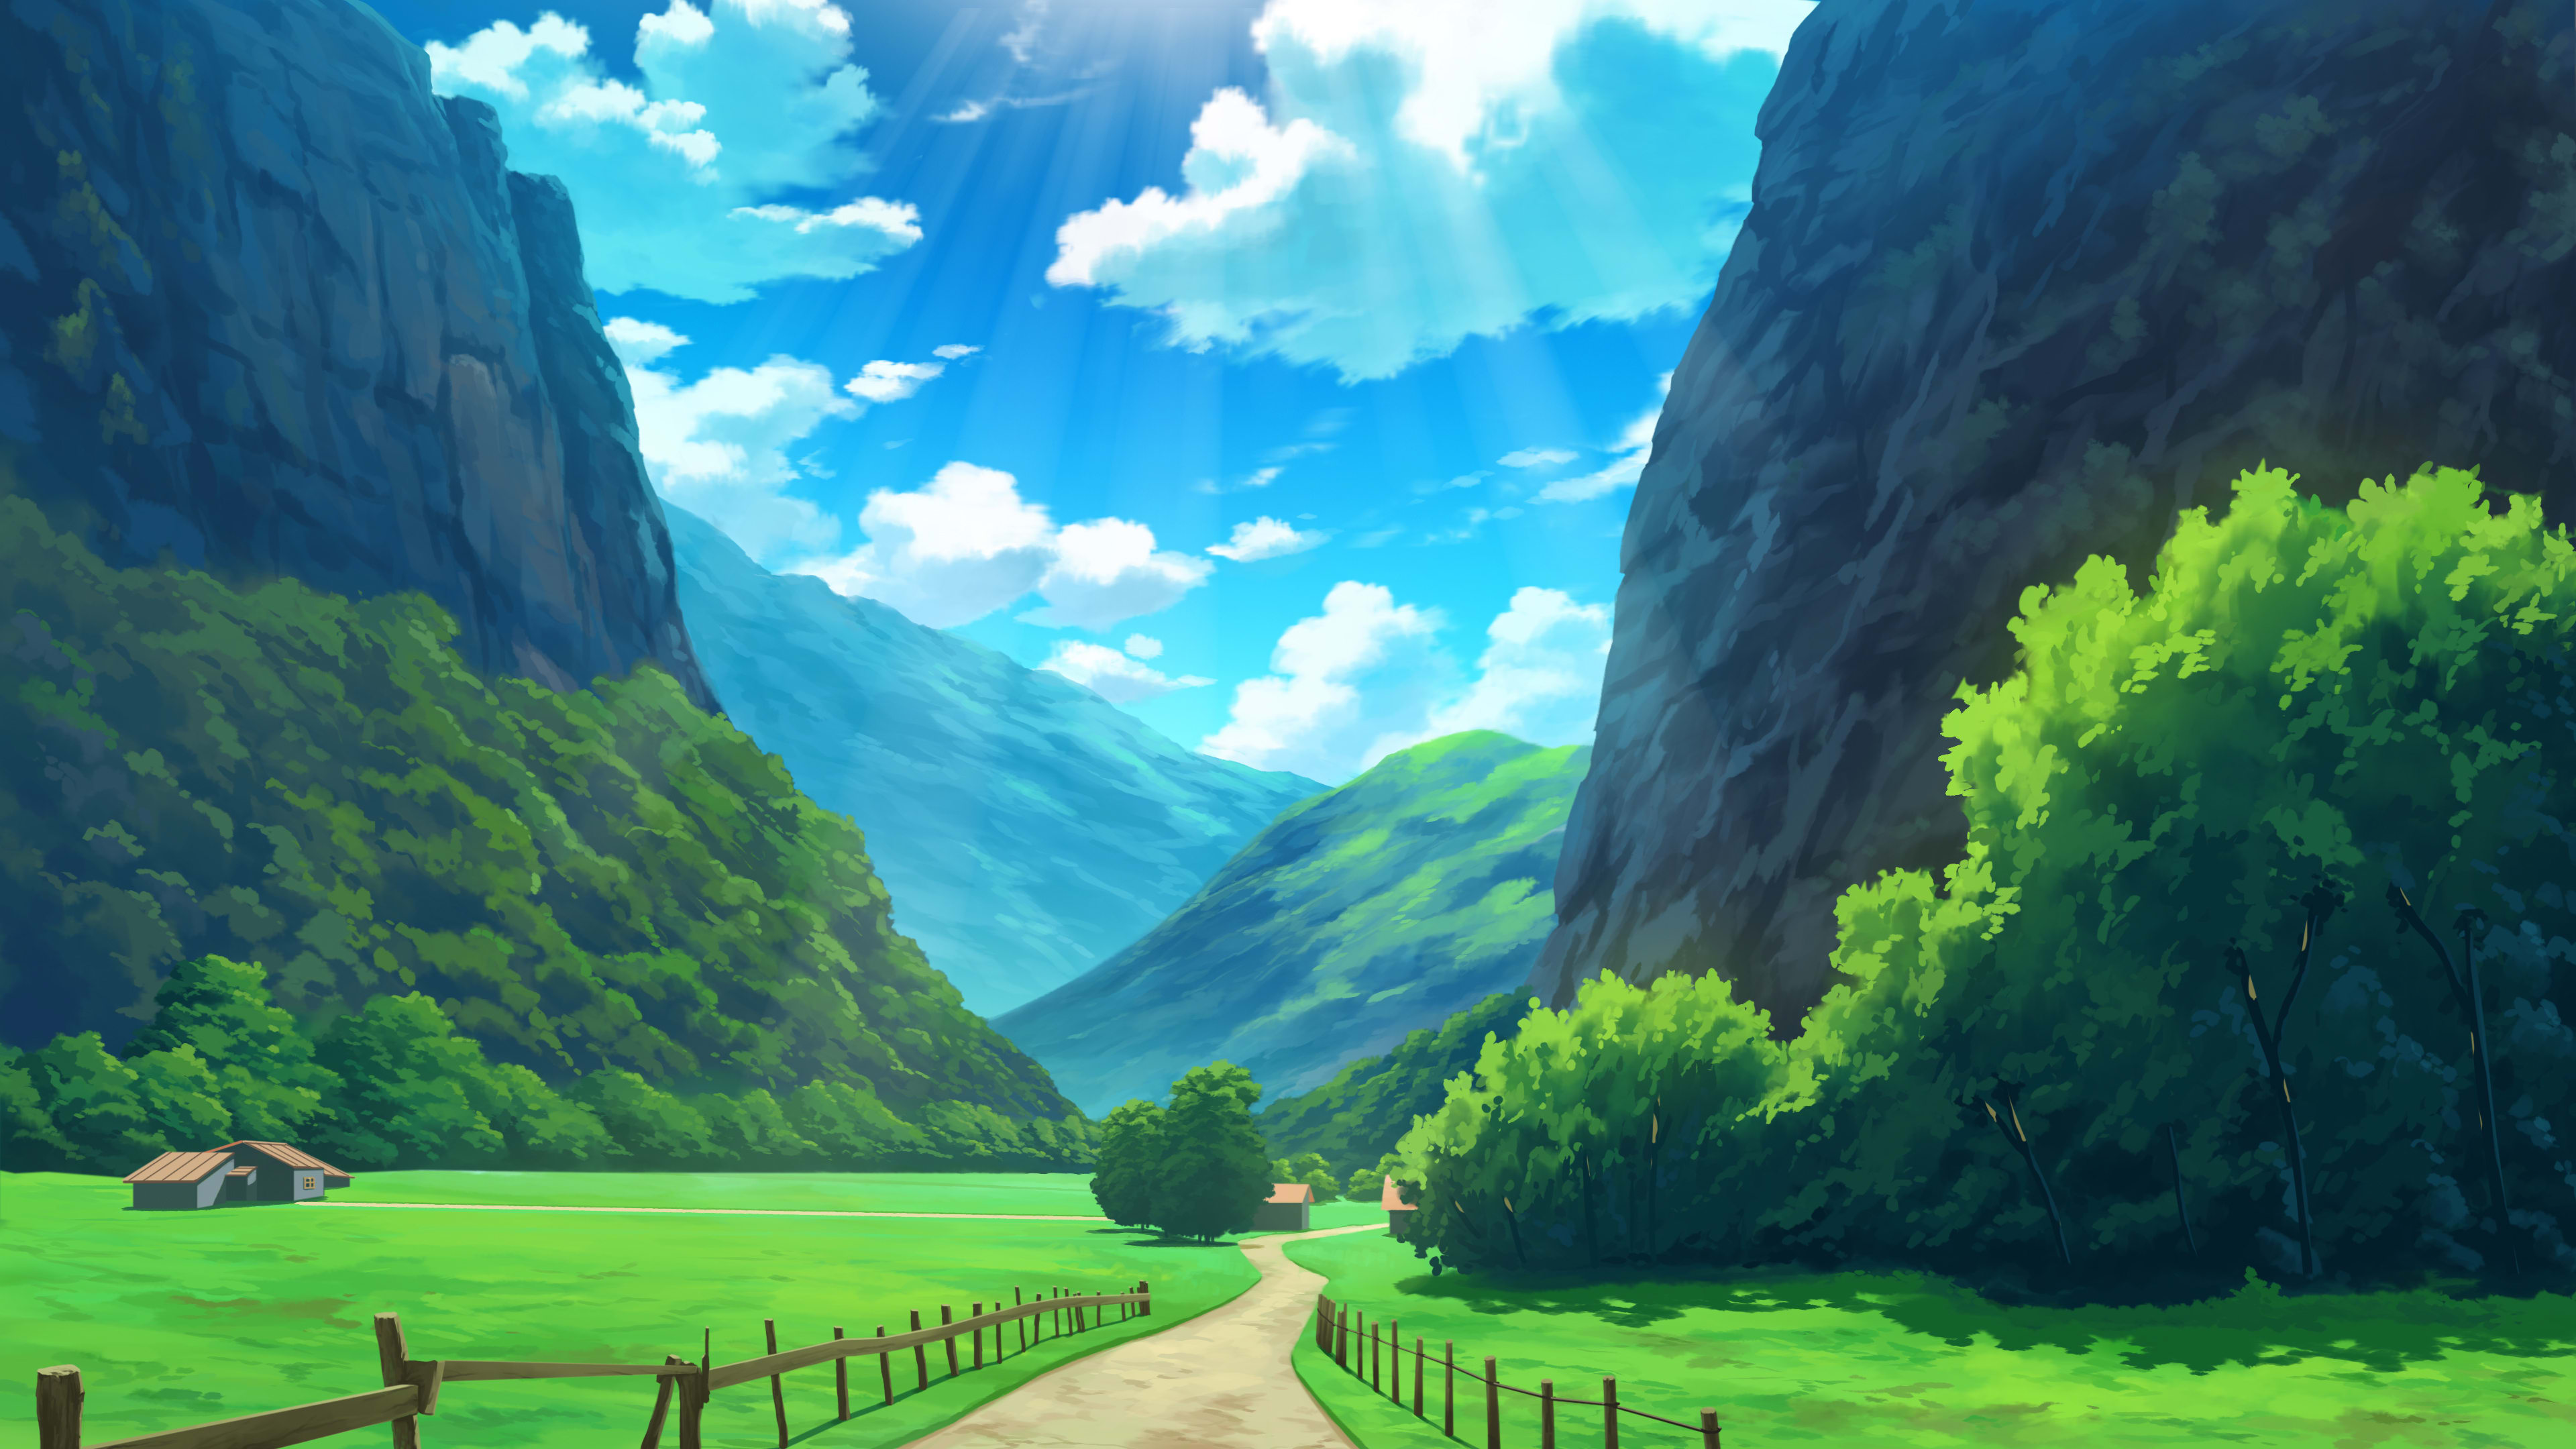 [View 35+] View Backgrounds Anime Wallpaper Phone Gif cdr